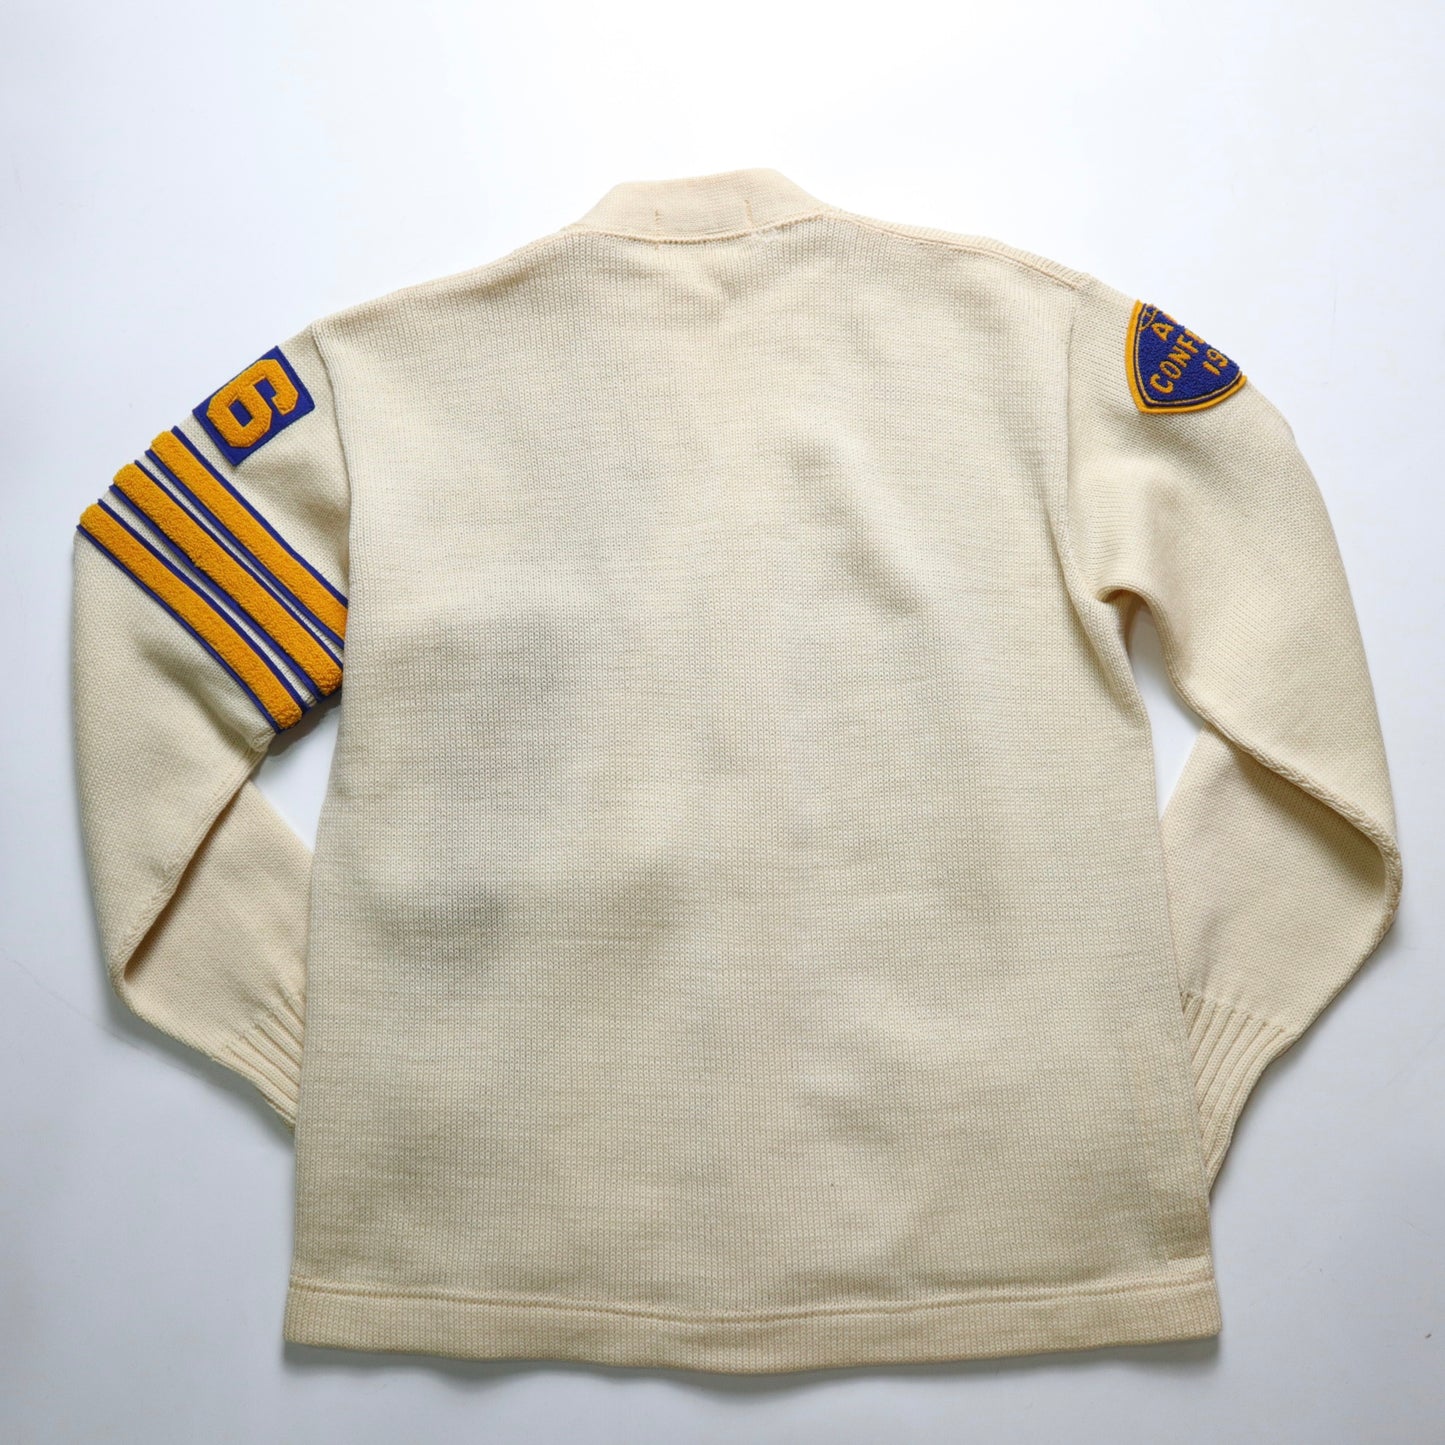 1950s IMPERIAL The Humane Society of the United States wool campus knitted jacket made in the United States